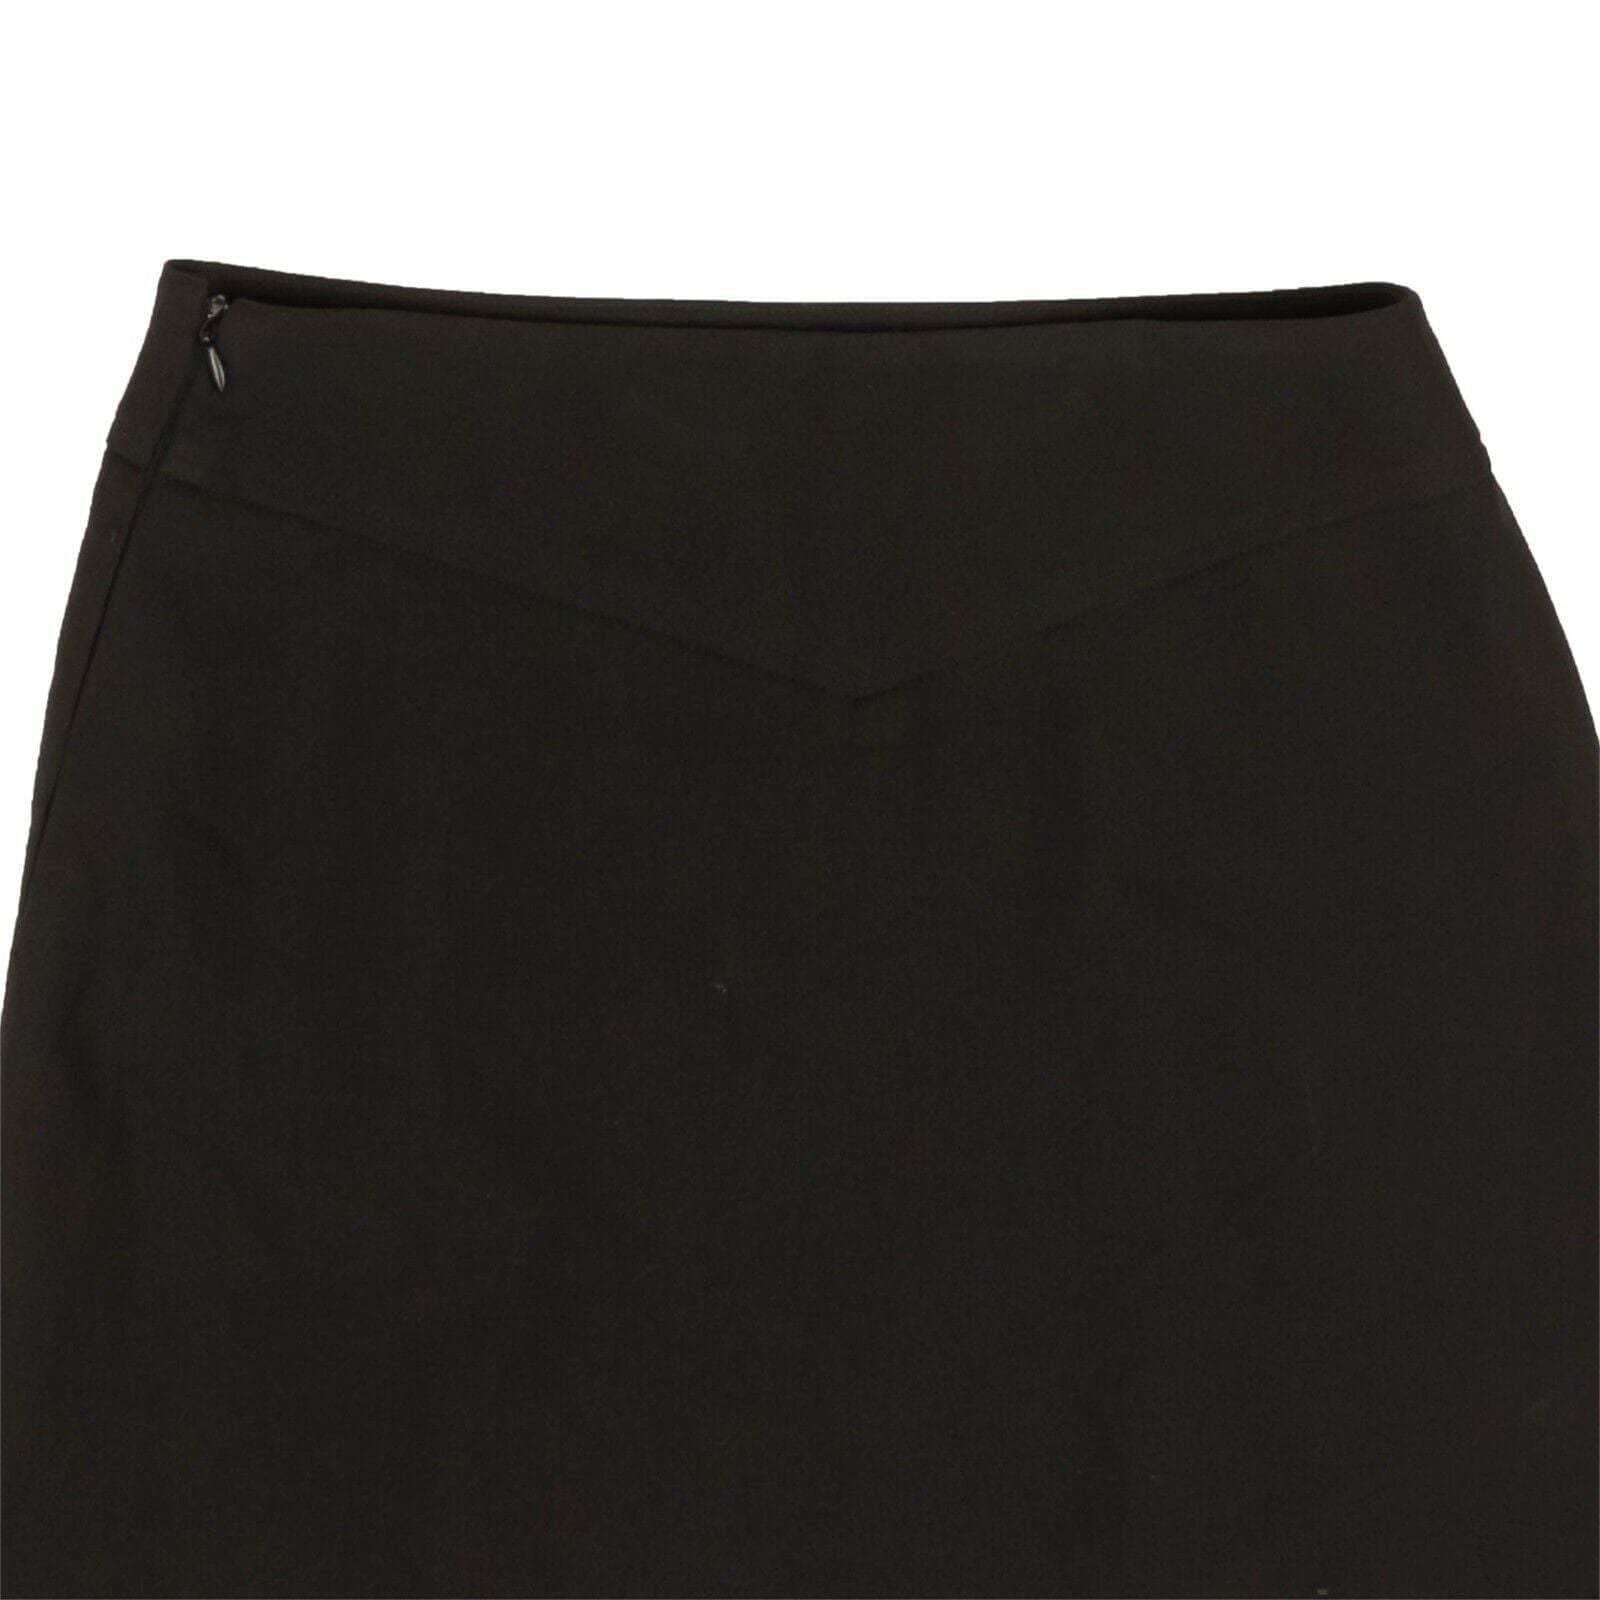 Palm Angels 250-500, channelenable-all, chicmi, couponcollection, gender-womens, main-clothing, palm-angels, size-40 40 Black Zipper Pleat Miniskirt 82NGG-PA-1405/40 82NGG-PA-1405/40